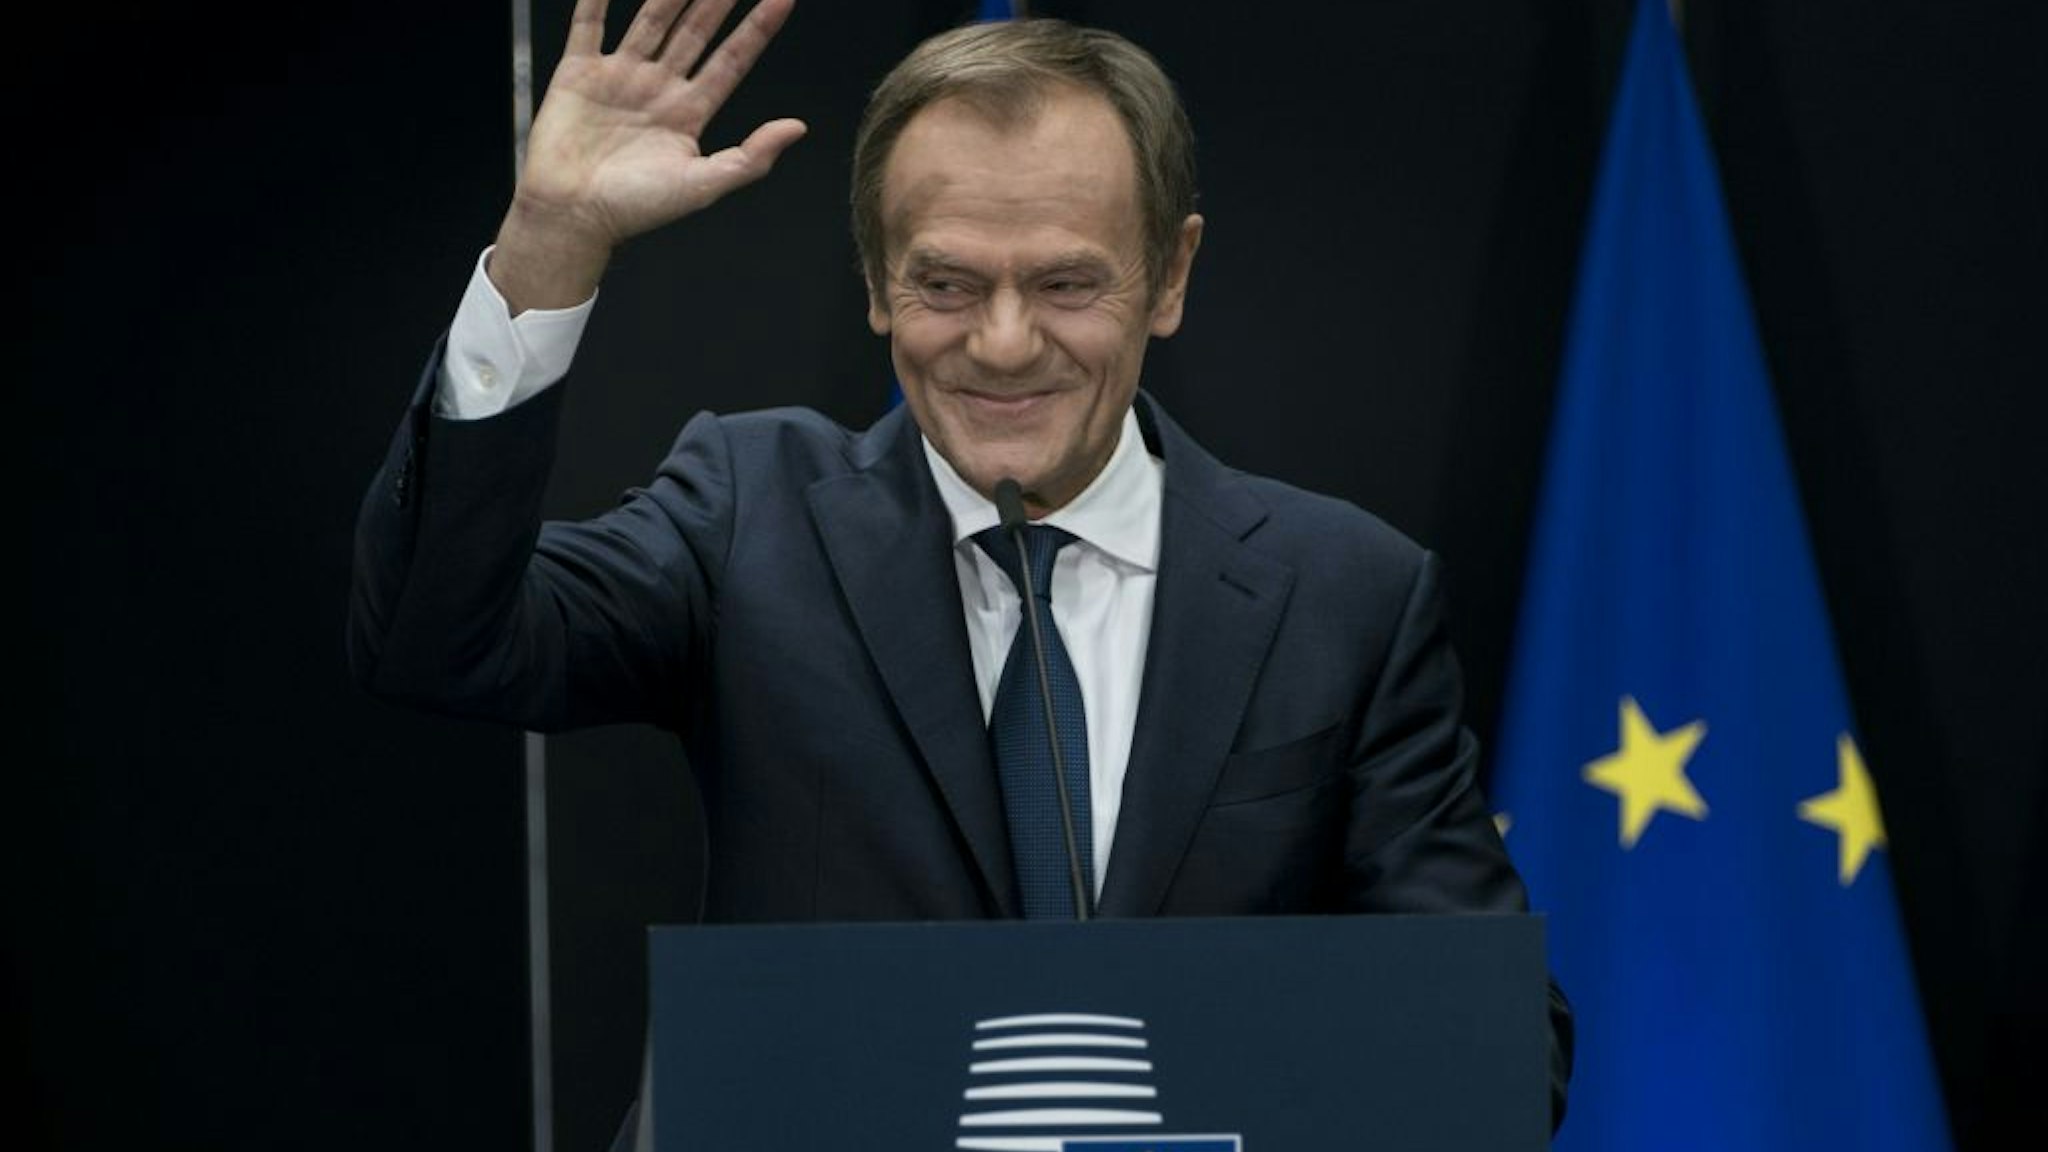 Outgoing European Council President Donald Tusk waves during the handover ceremony between Tusk and his successor, at the European headquarters in Brussels, on November 29, 2019.